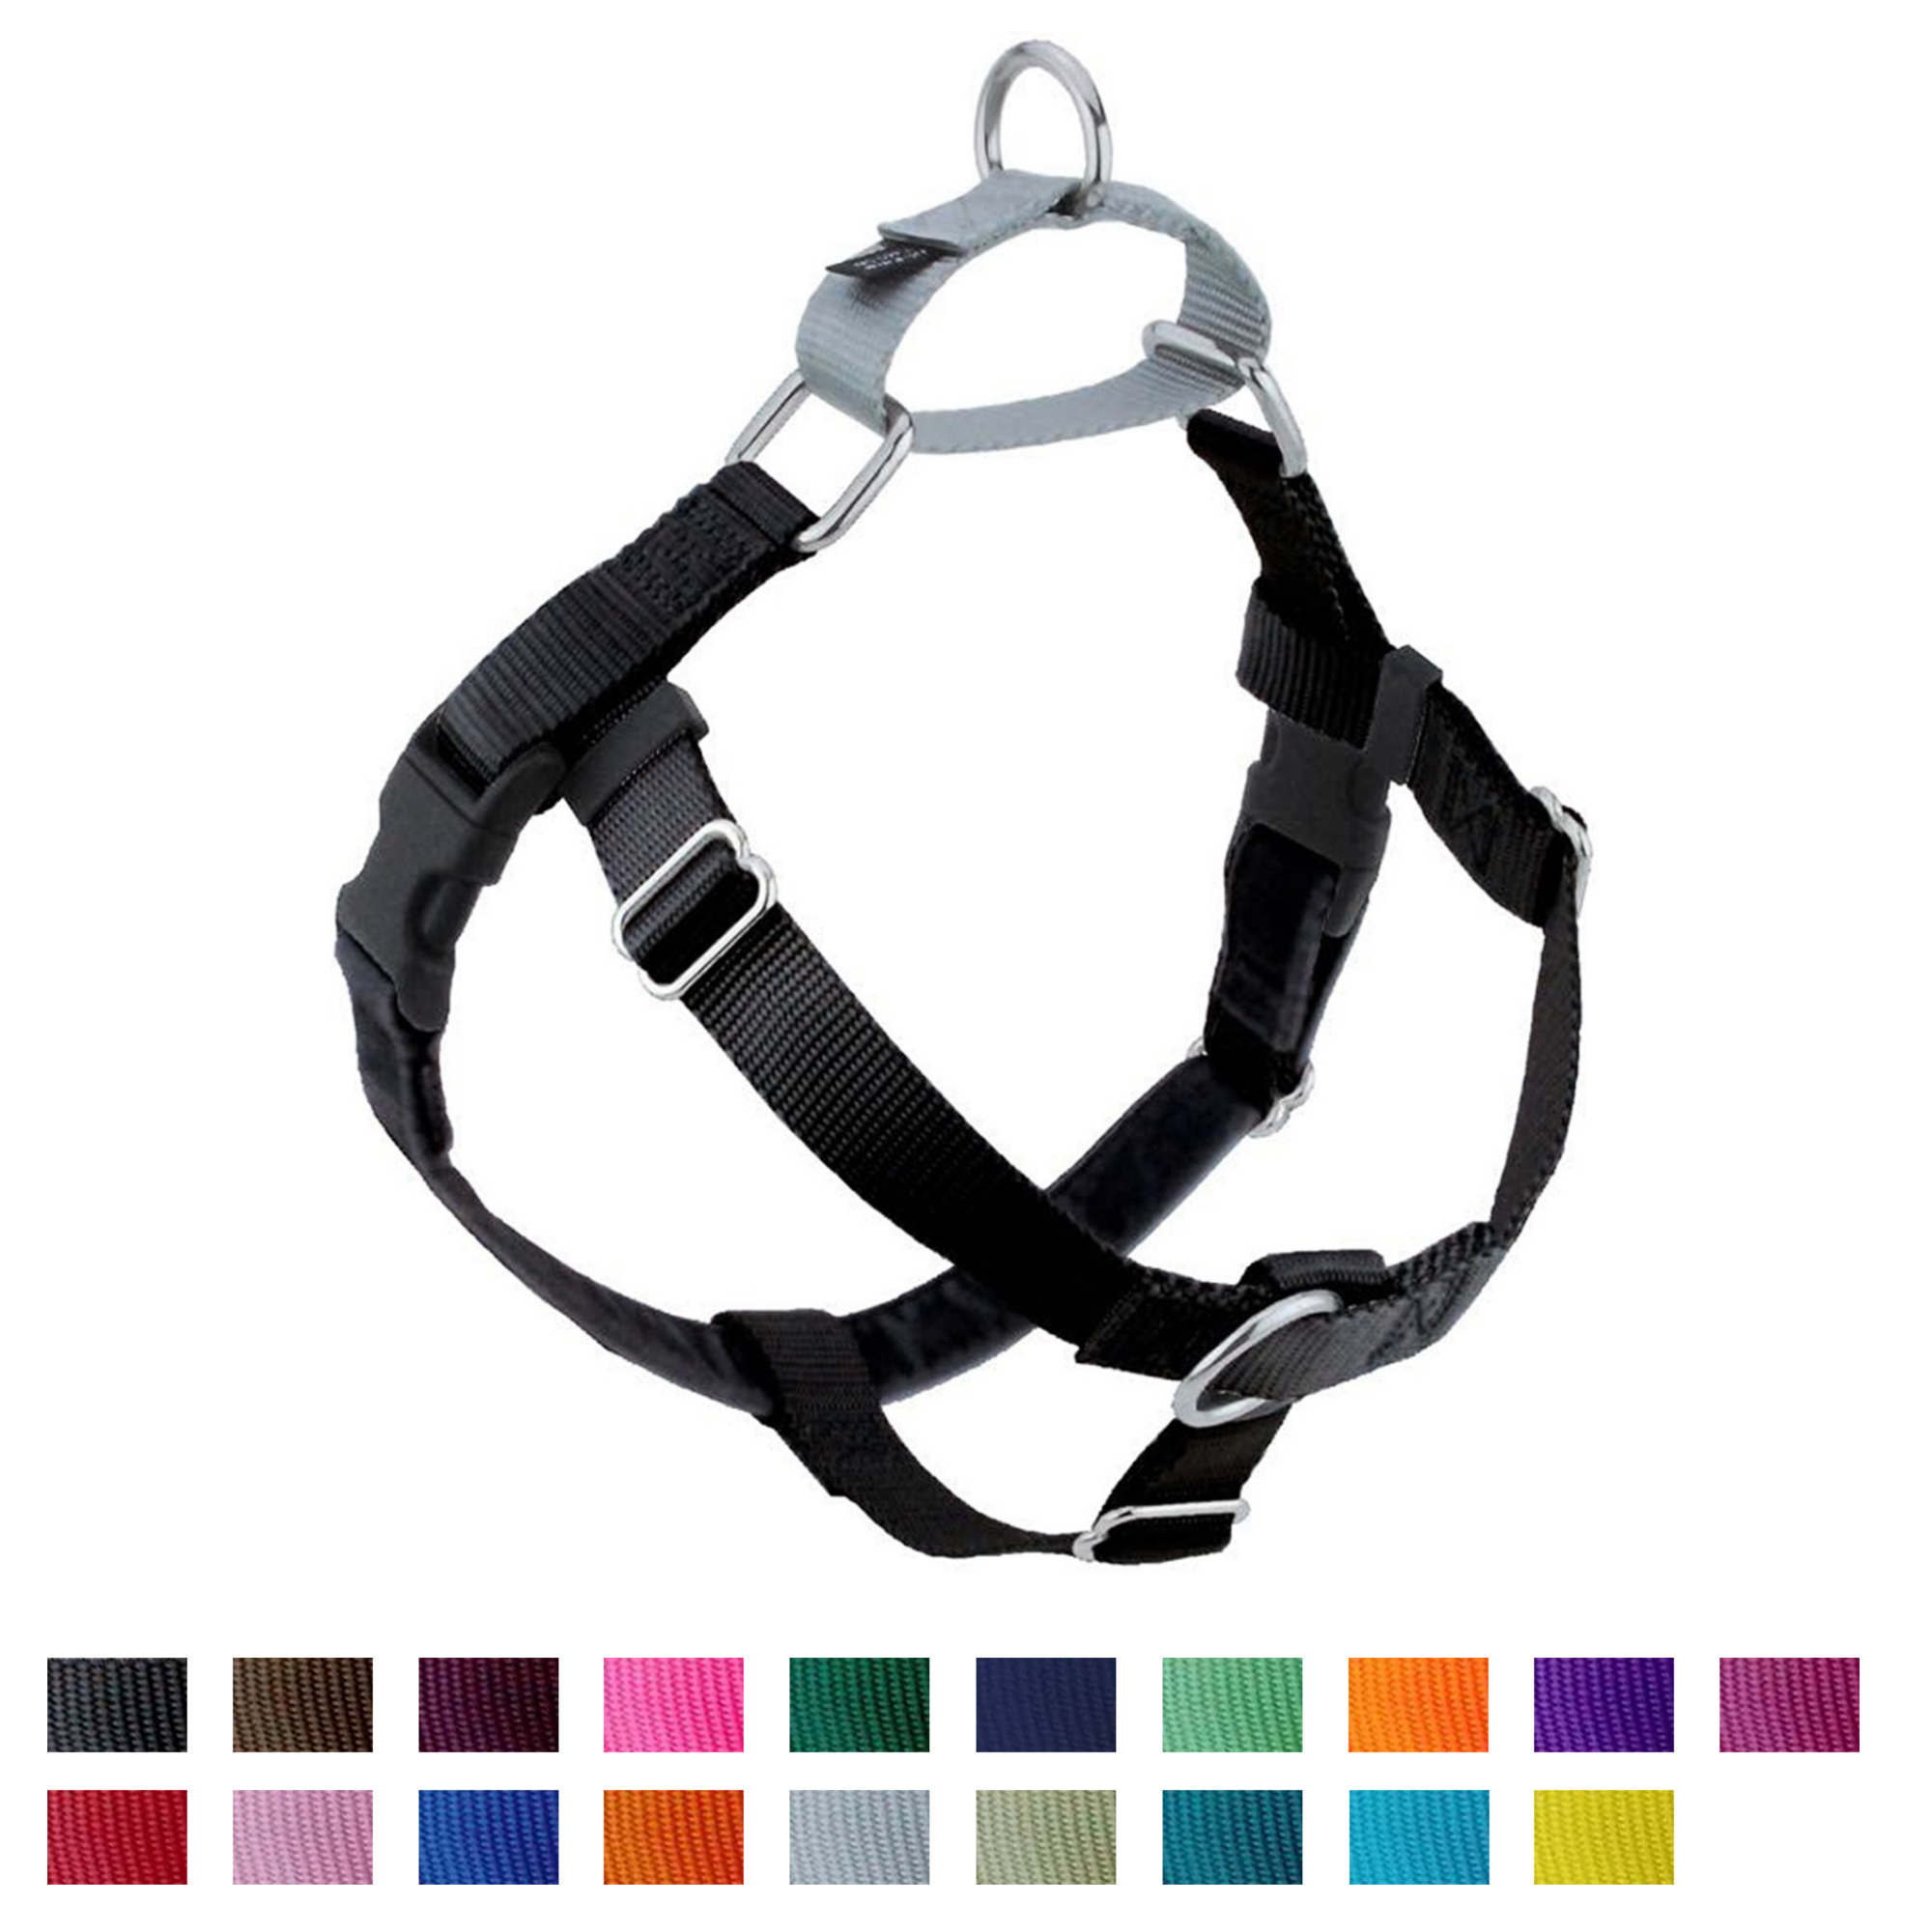 2 Hounds Design Freedom No-Pull Dog Harness Only Black XS - 5/8" - Paw Naturals